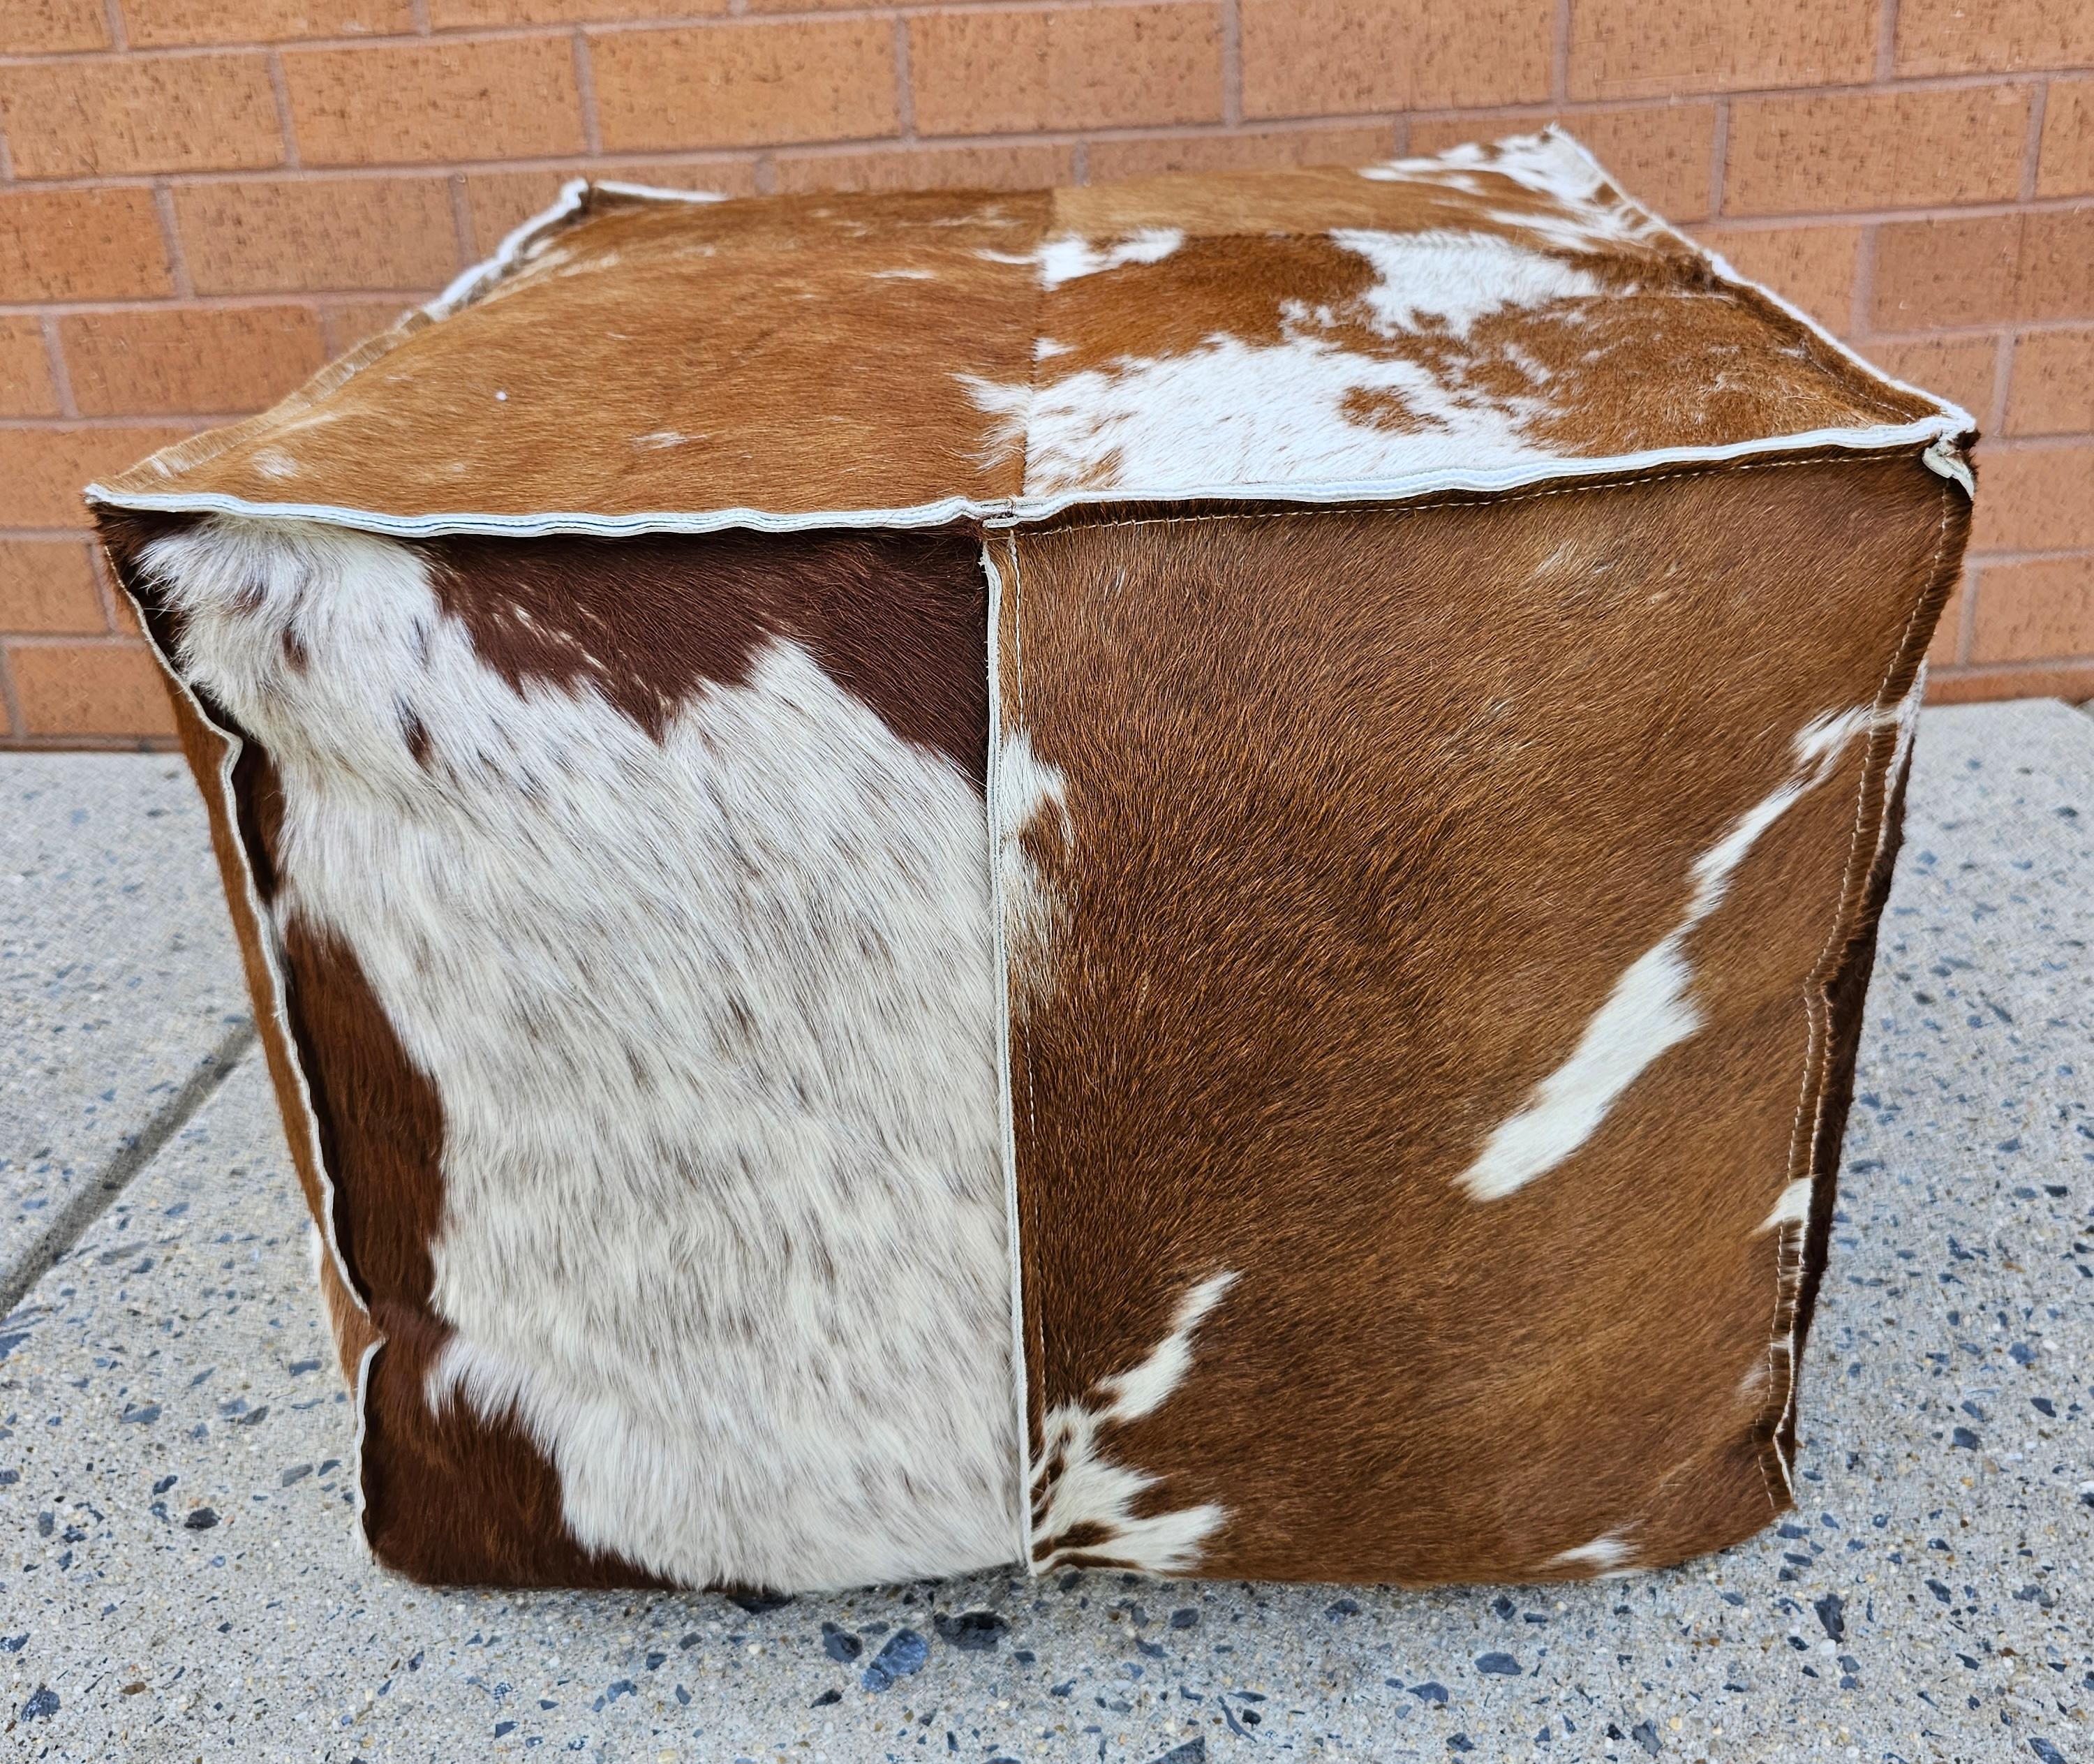 Cowhide cube ottoman with leather stitched detail around the edges for additional strength. This cowhide ottoman is unique and natural product. Measures 20